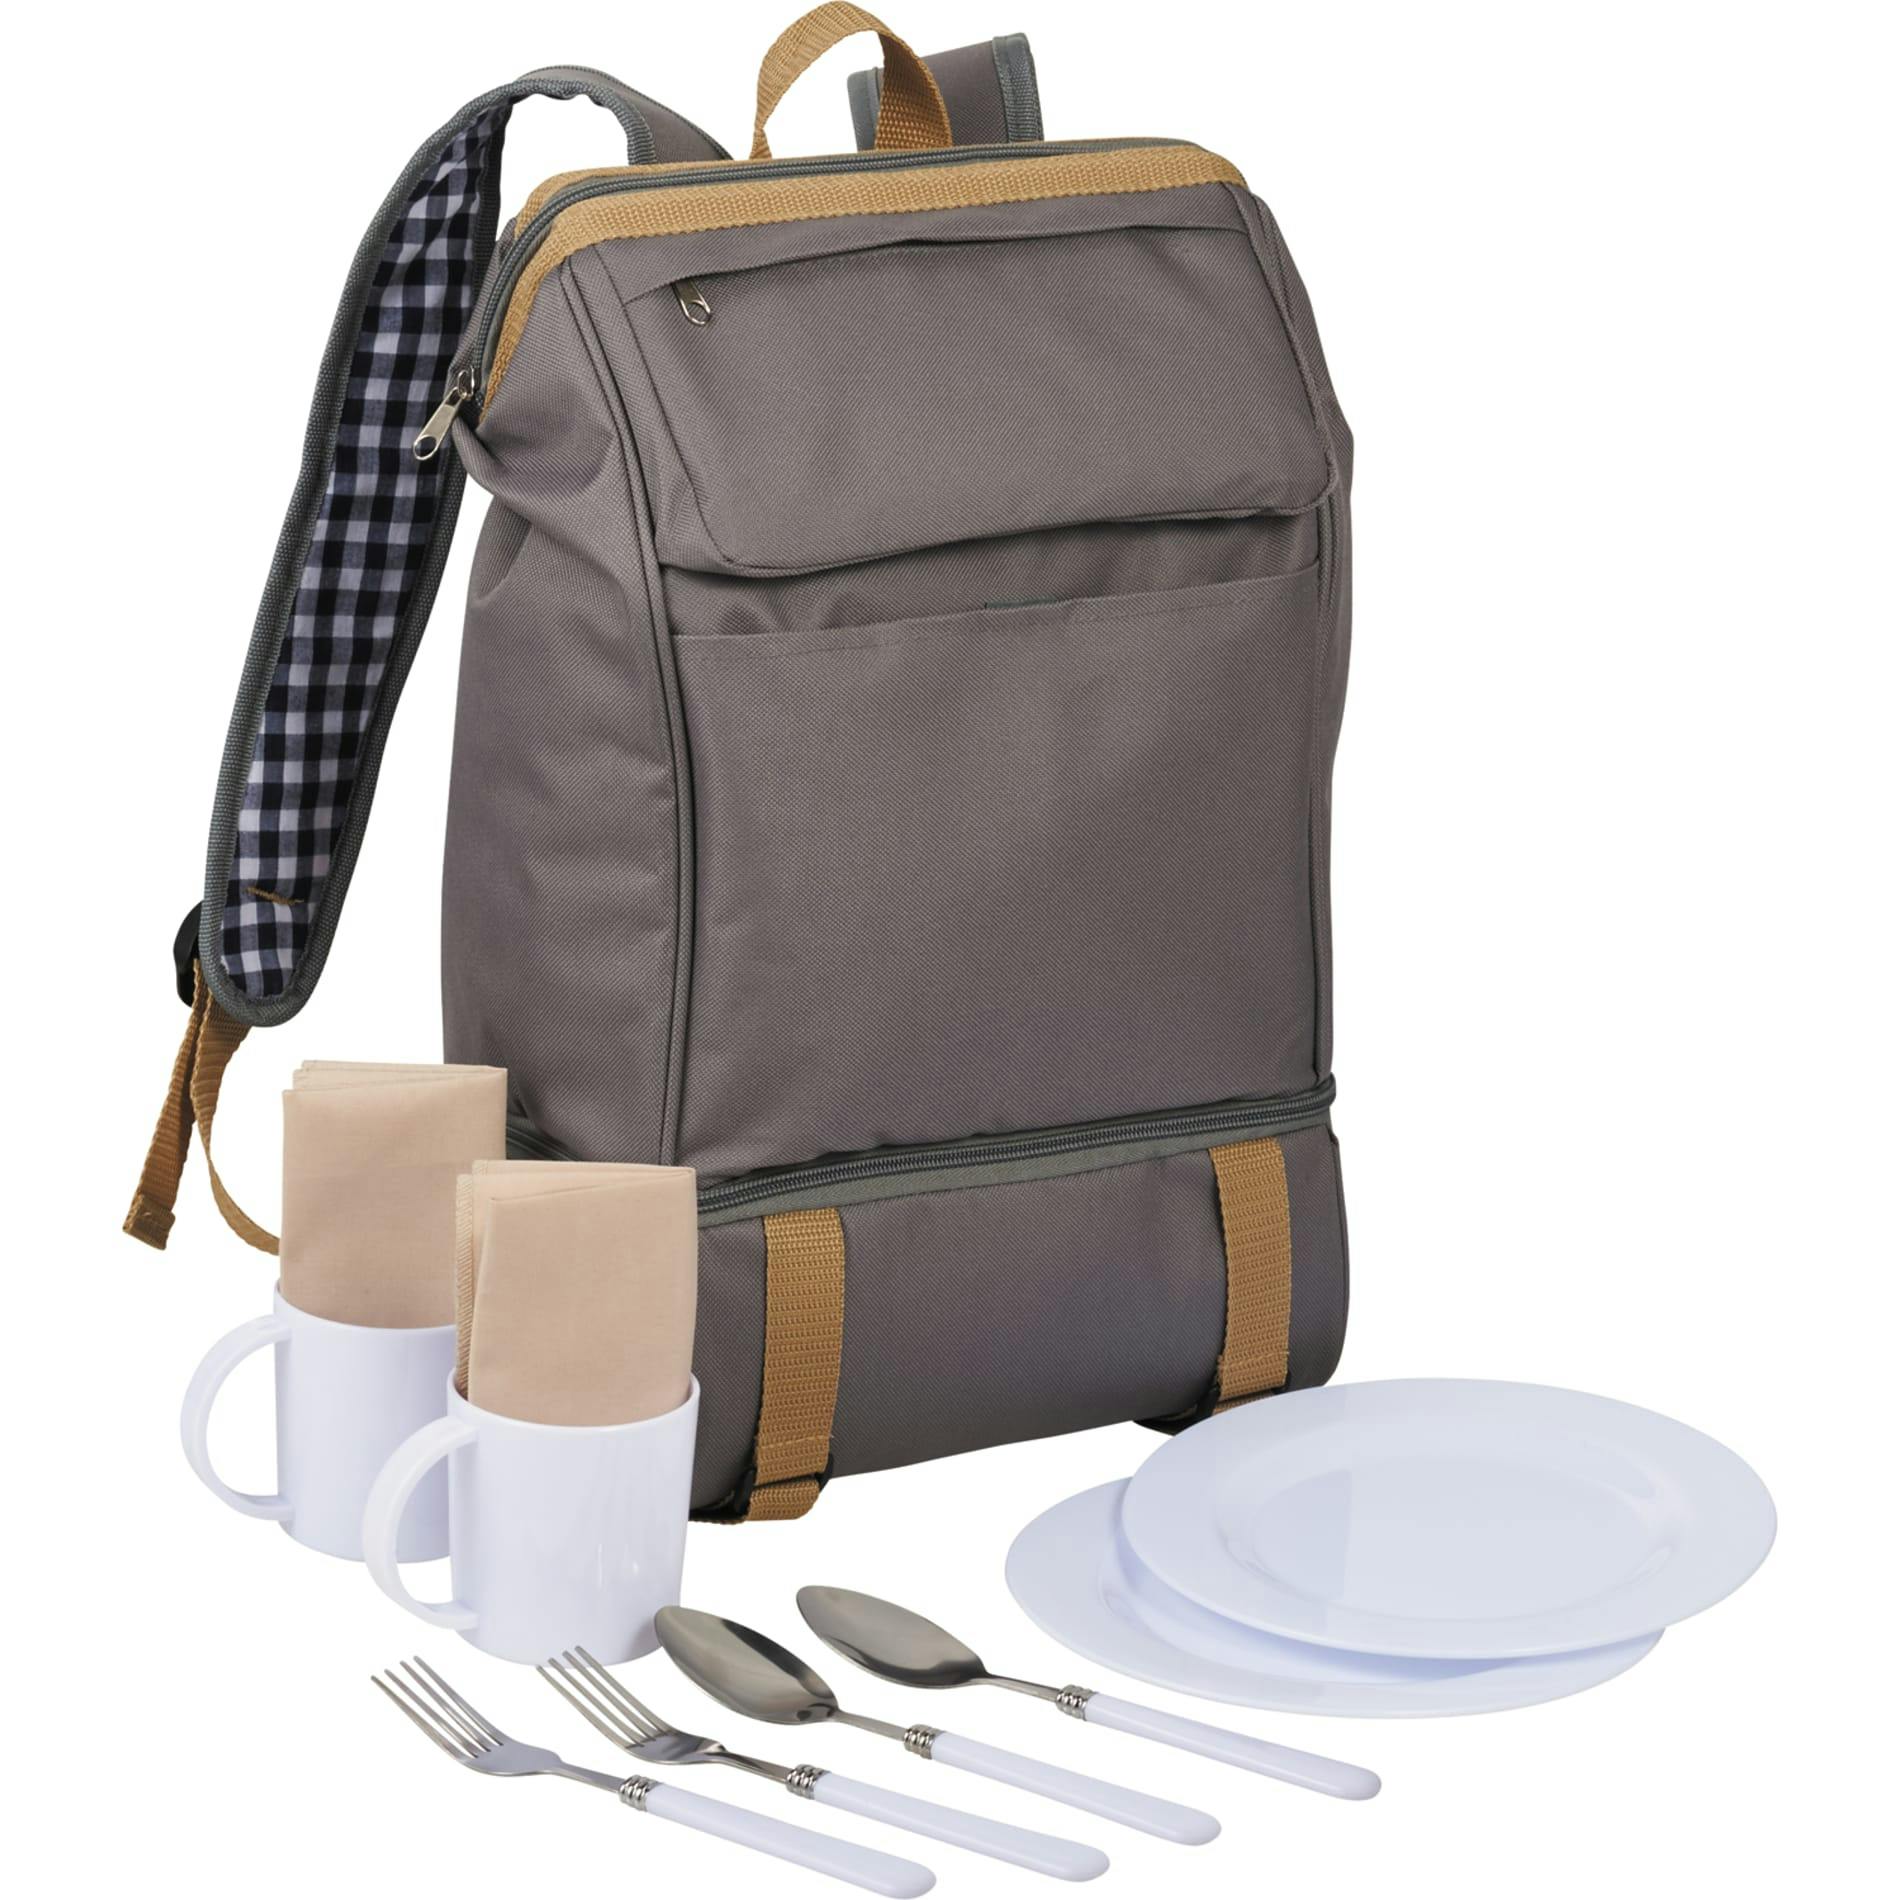 Café Picnic Backpack for Two - additional Image 1